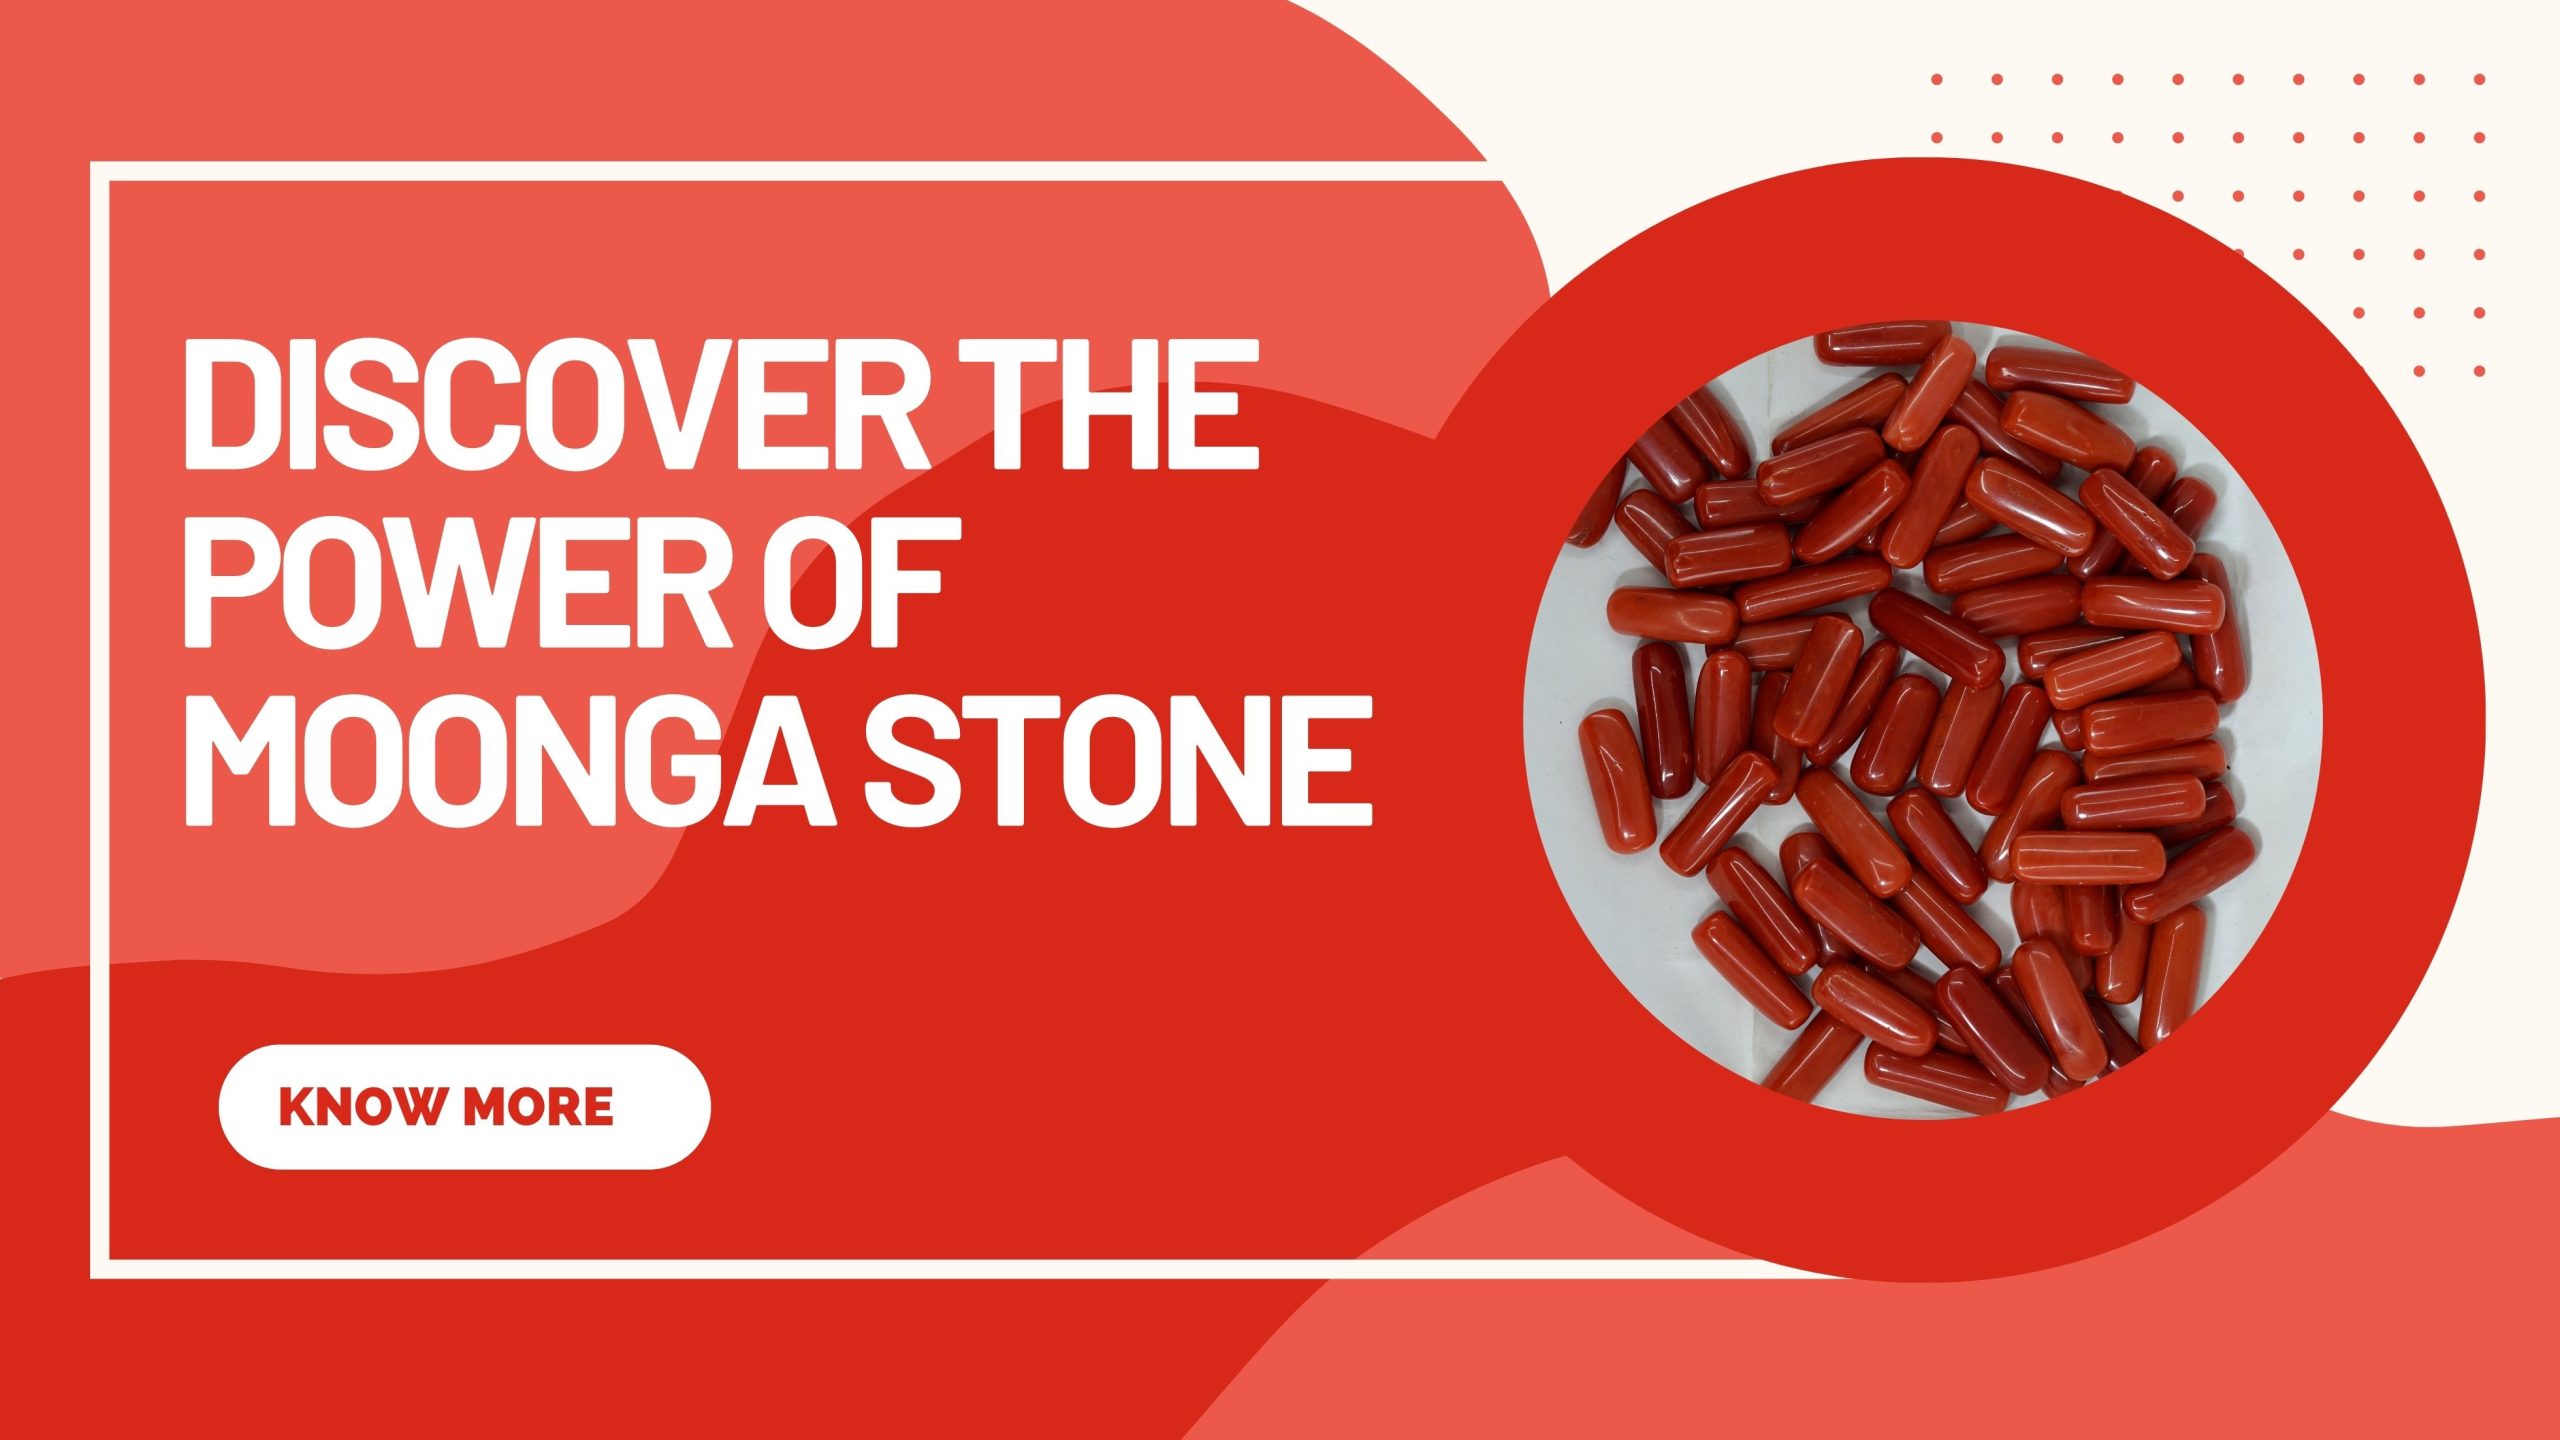 Discover the Power of Moonga Stone